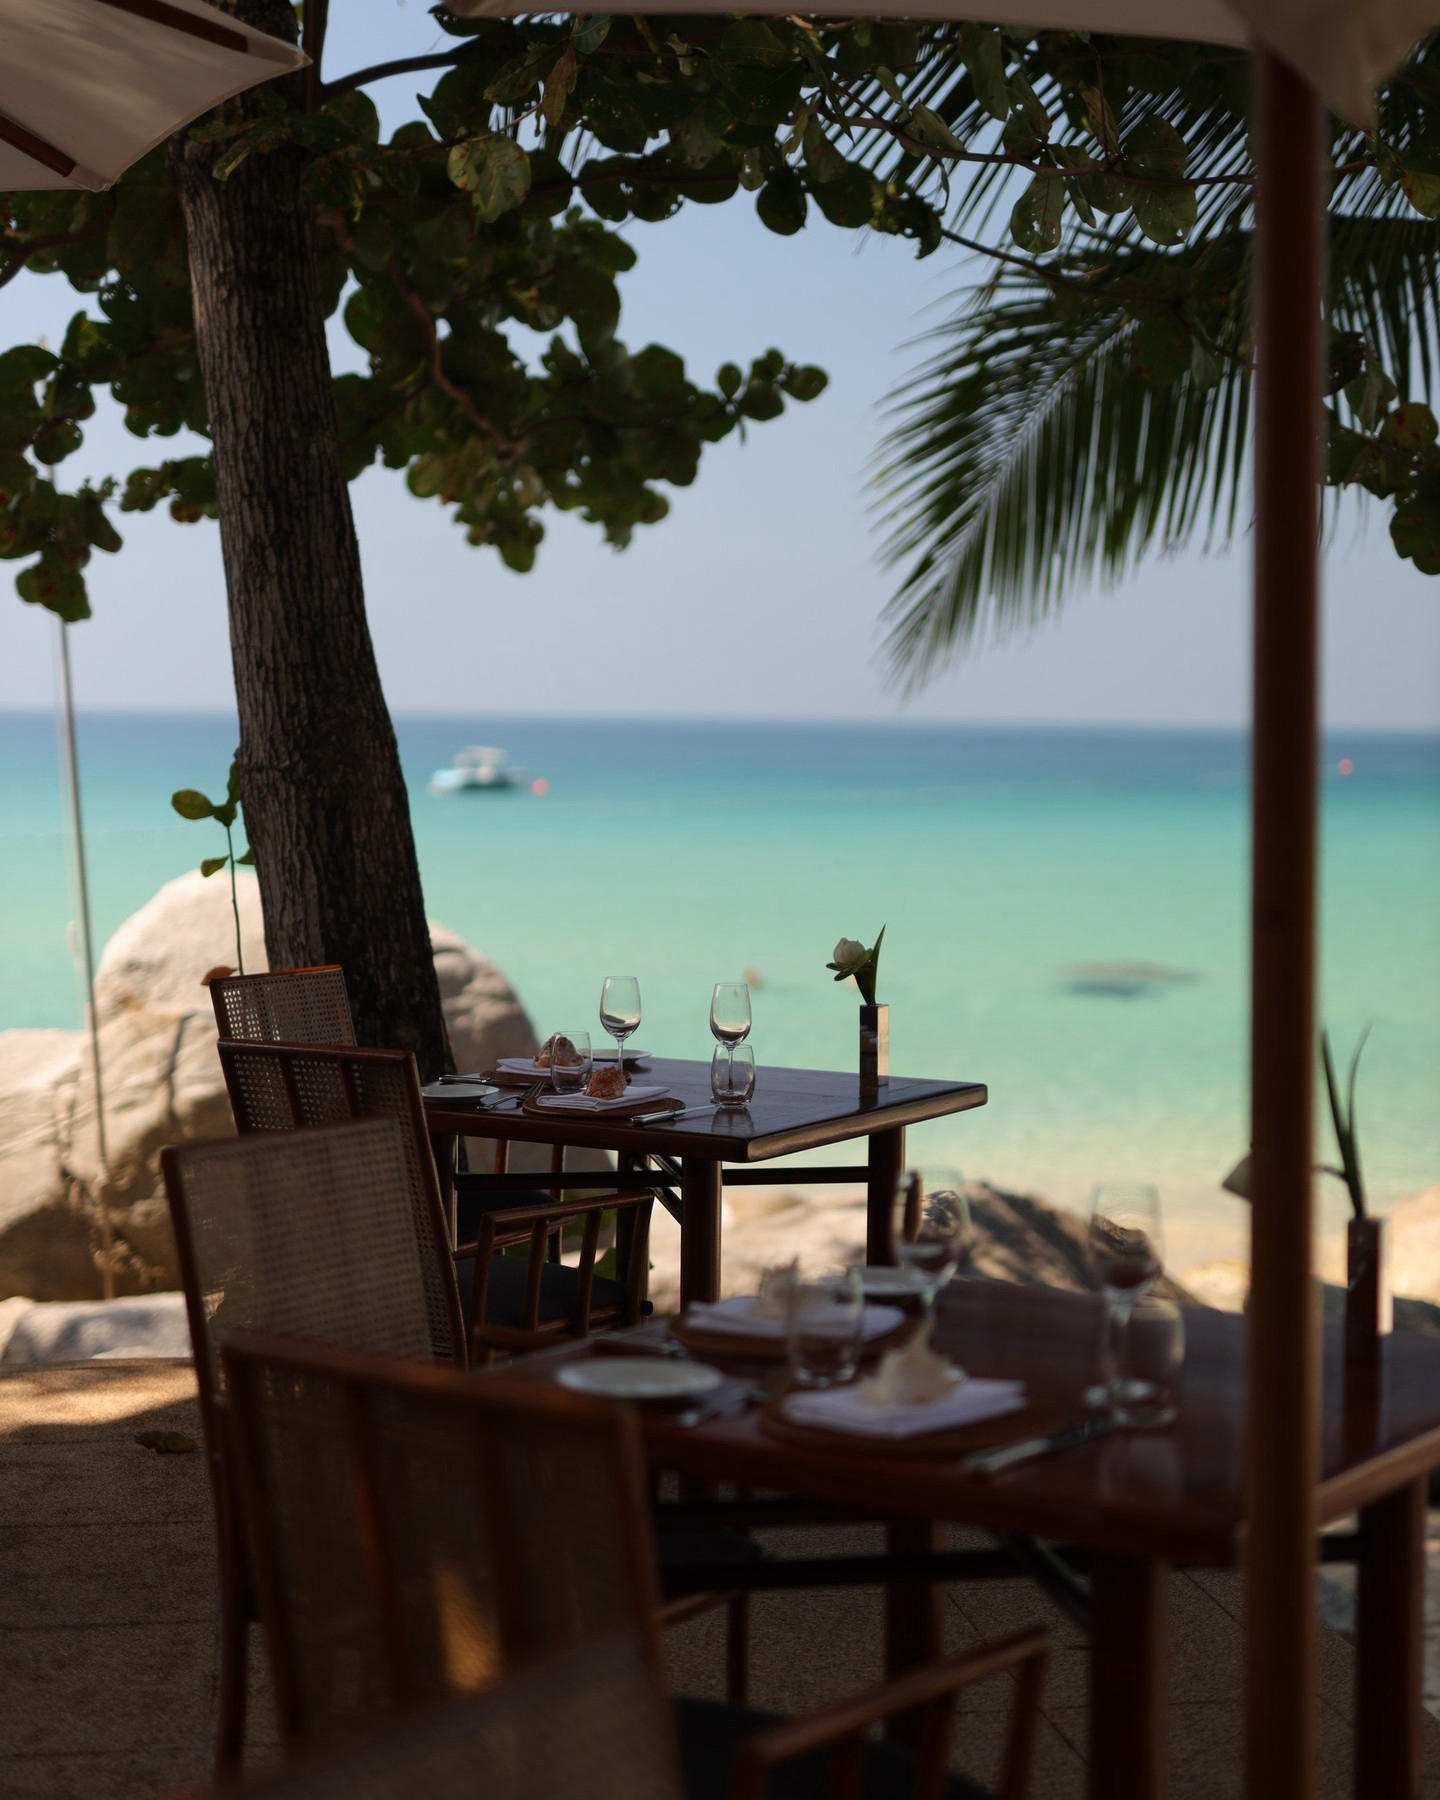 Open seasonally for drinks and dining, Amanpuri's Beach Terrace showcases an authentic selection of